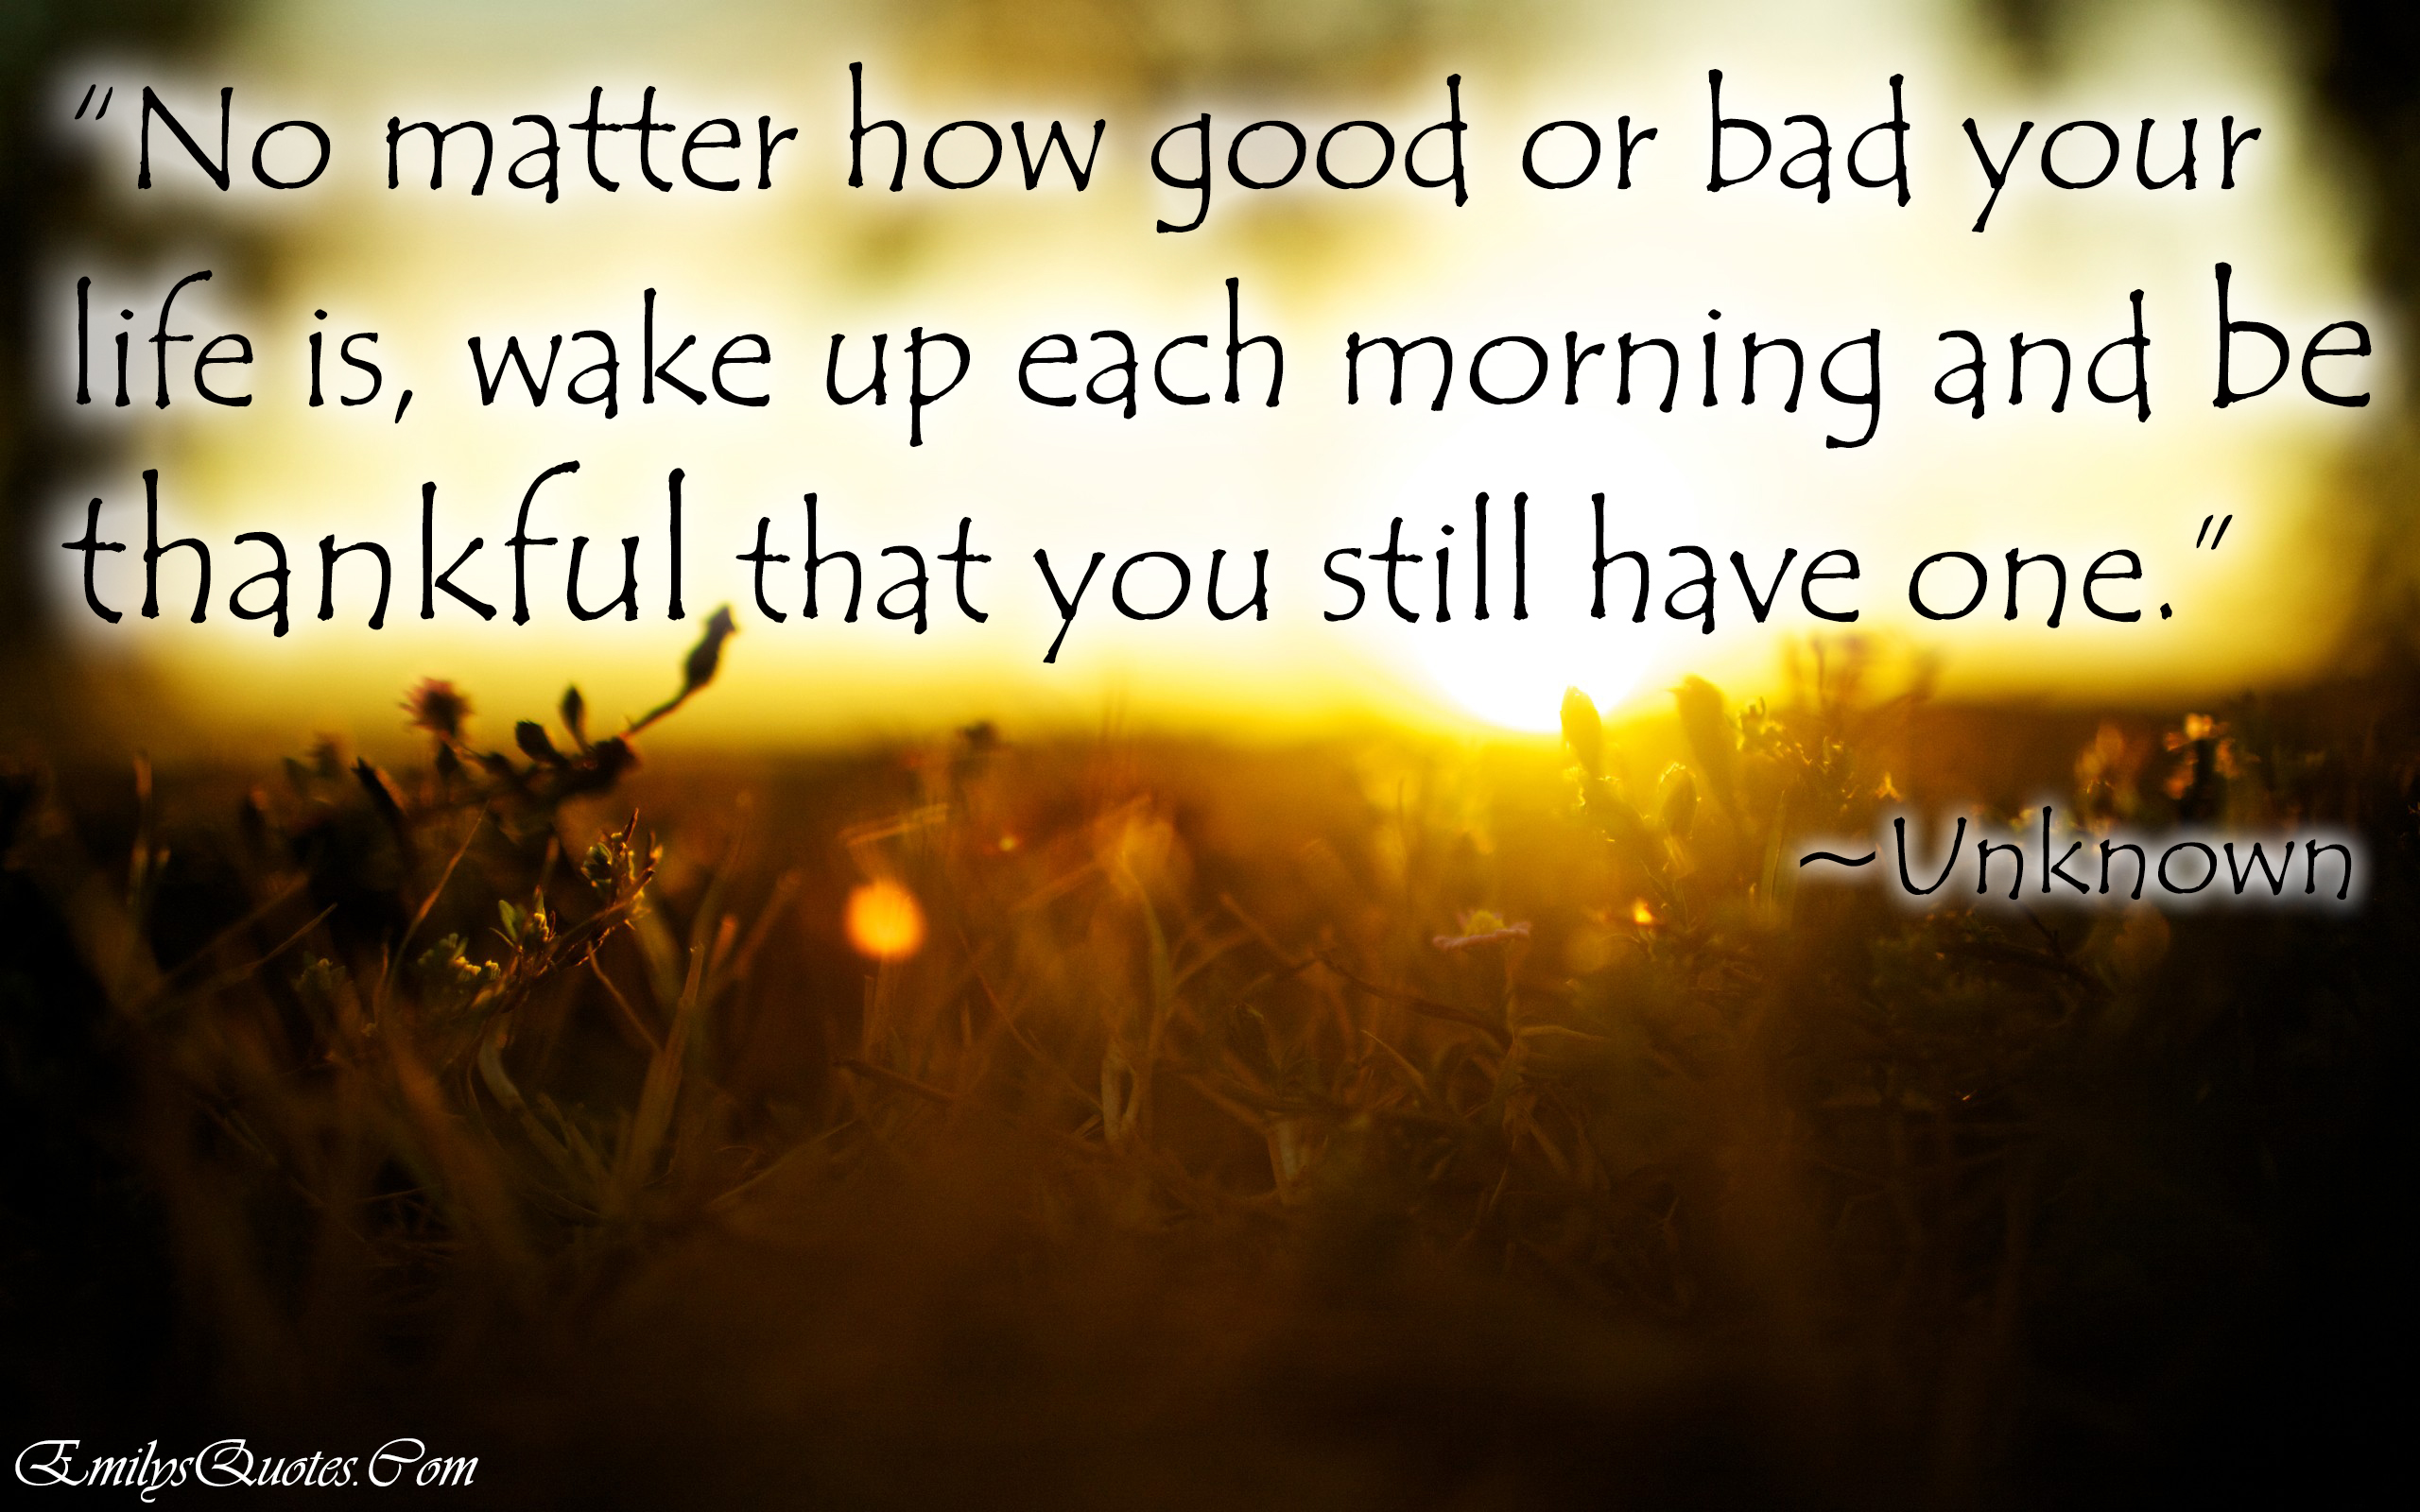 No matter how good or bad your life is, wake up each morning and be thankful that you still have one